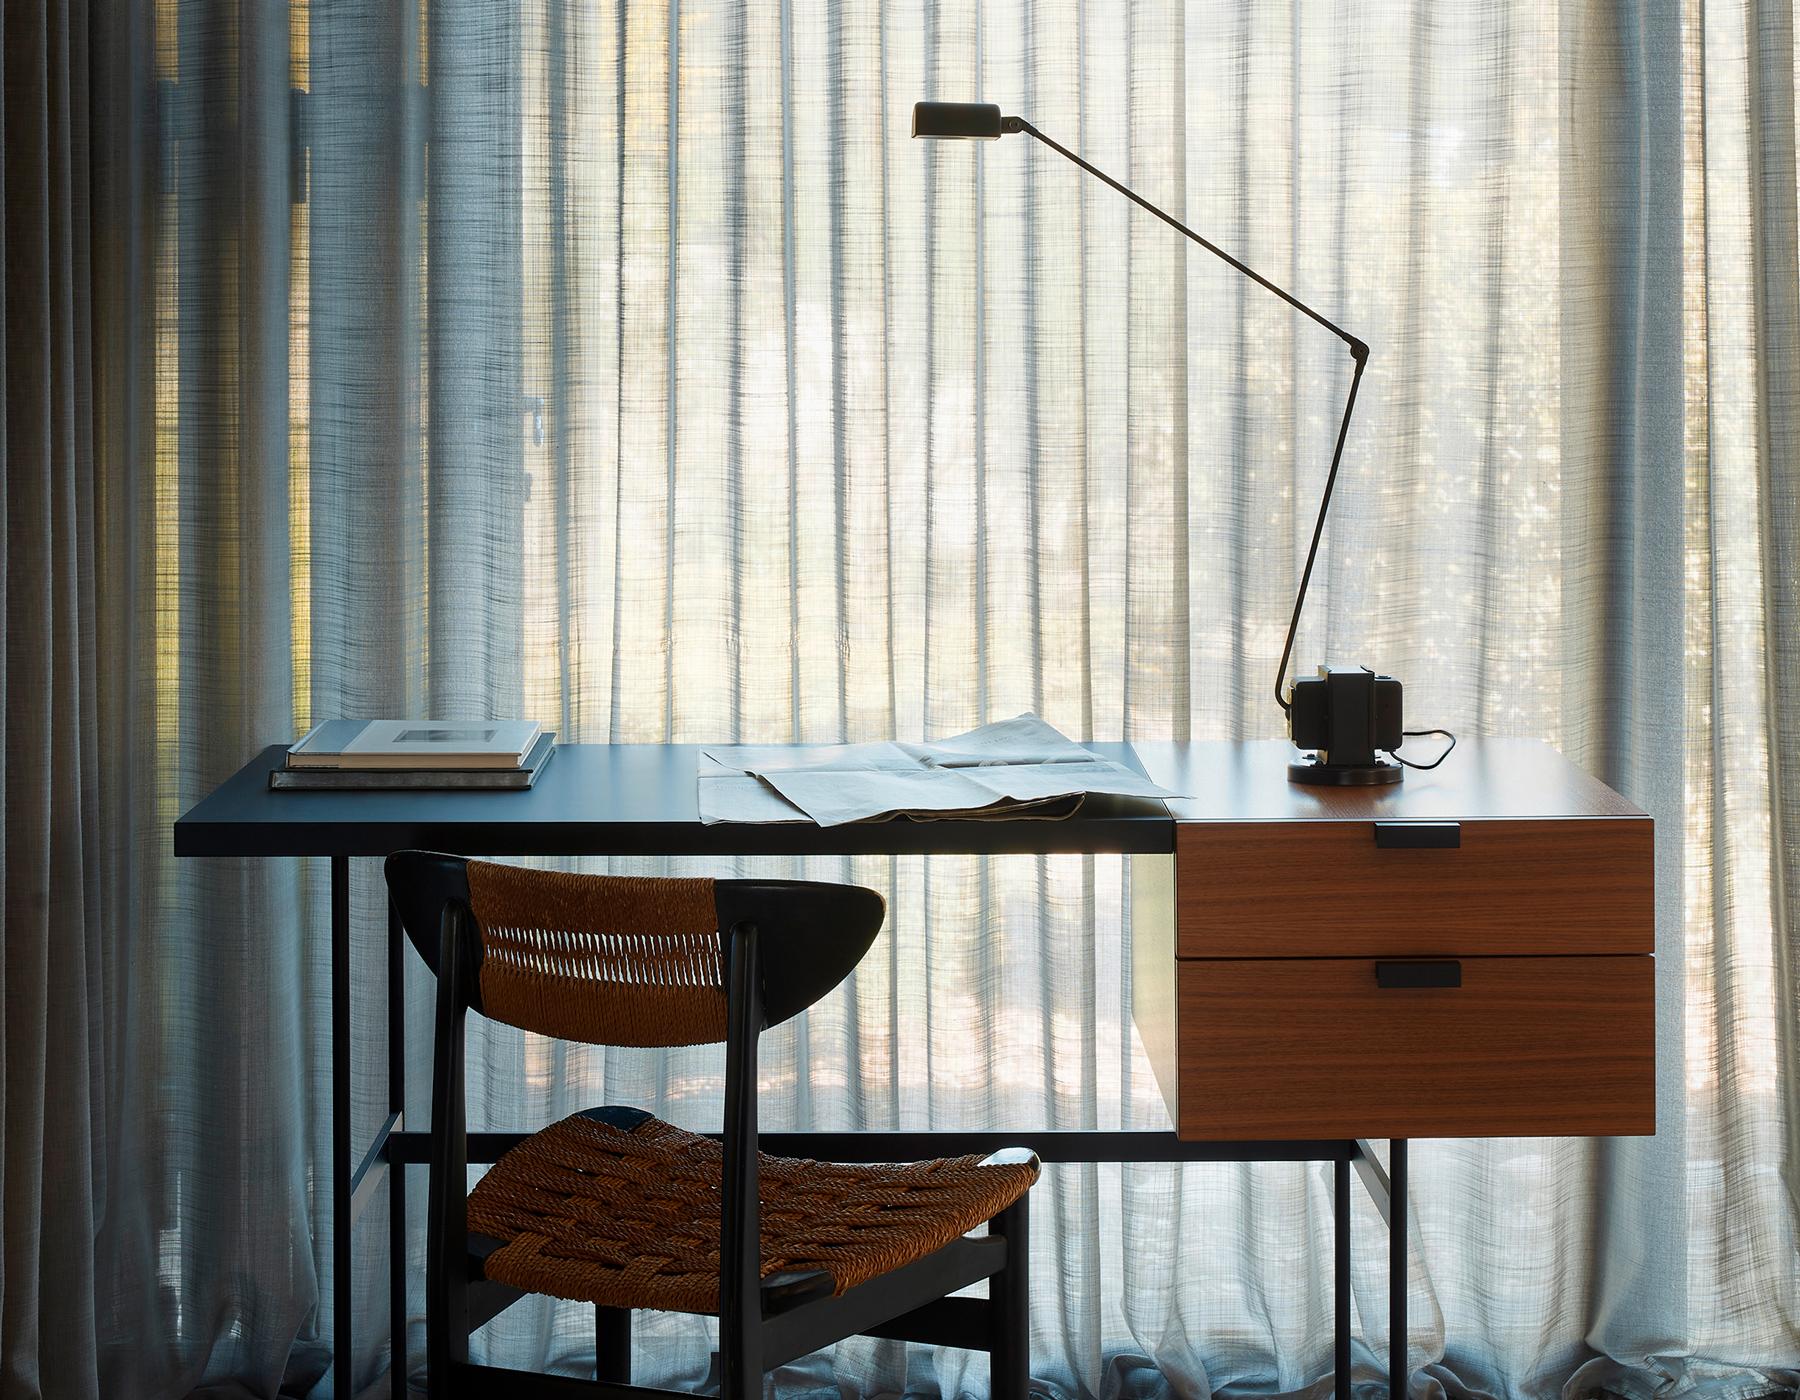 Lumina Daphine LED table lamp in Metallic bronze by Tommaso Cimini

Undisputed emblem of elegance and functionality, the Daphine represents the essence of Lumina.
The idea behind the creation of the Daphine lamp is as simple as it is effective: a